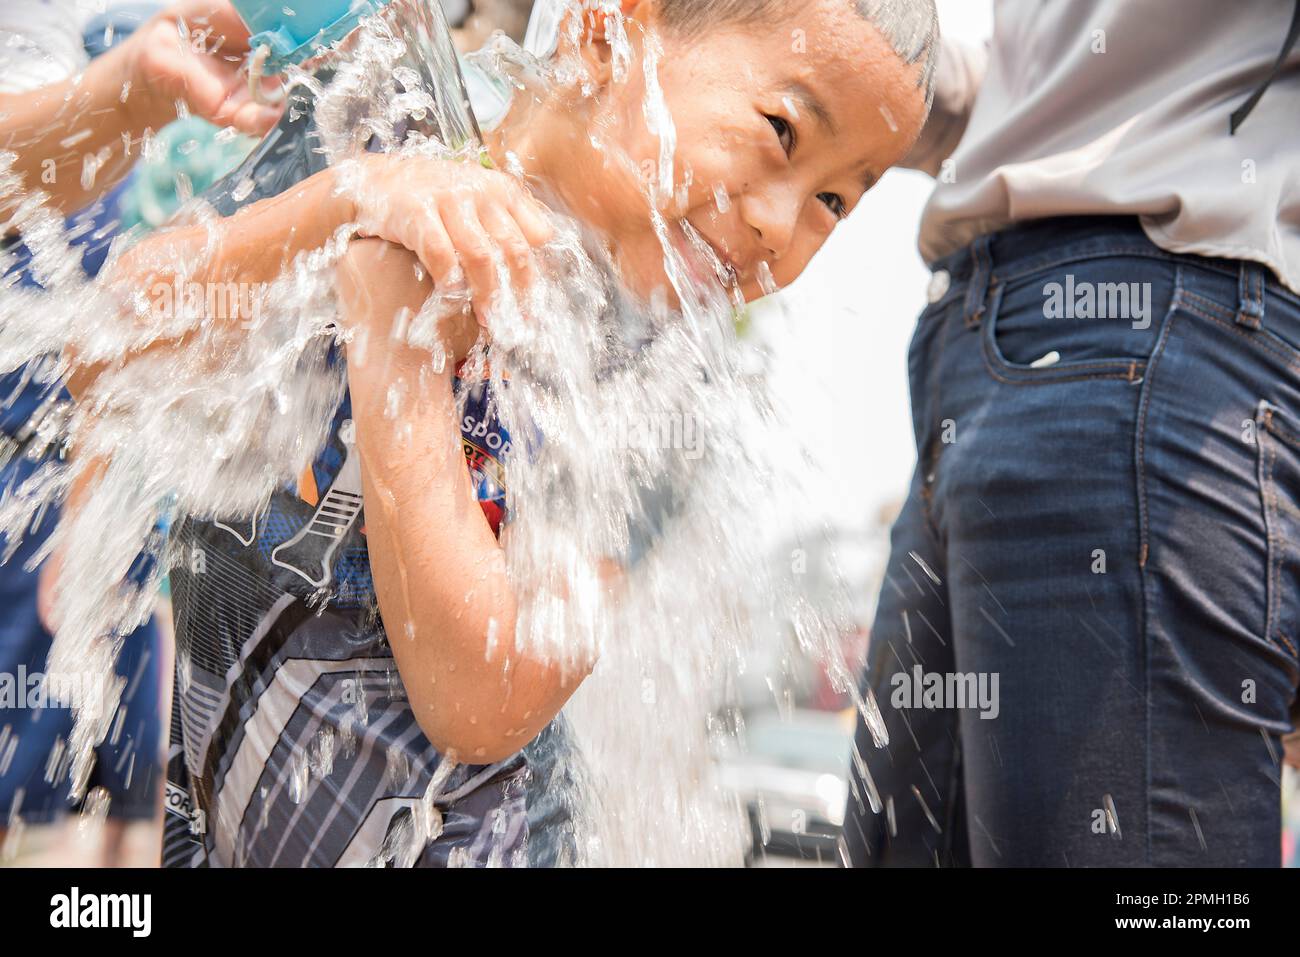 Boy soaked with water at Songkran water festival Chiang Mai, Thailand Stock Photo